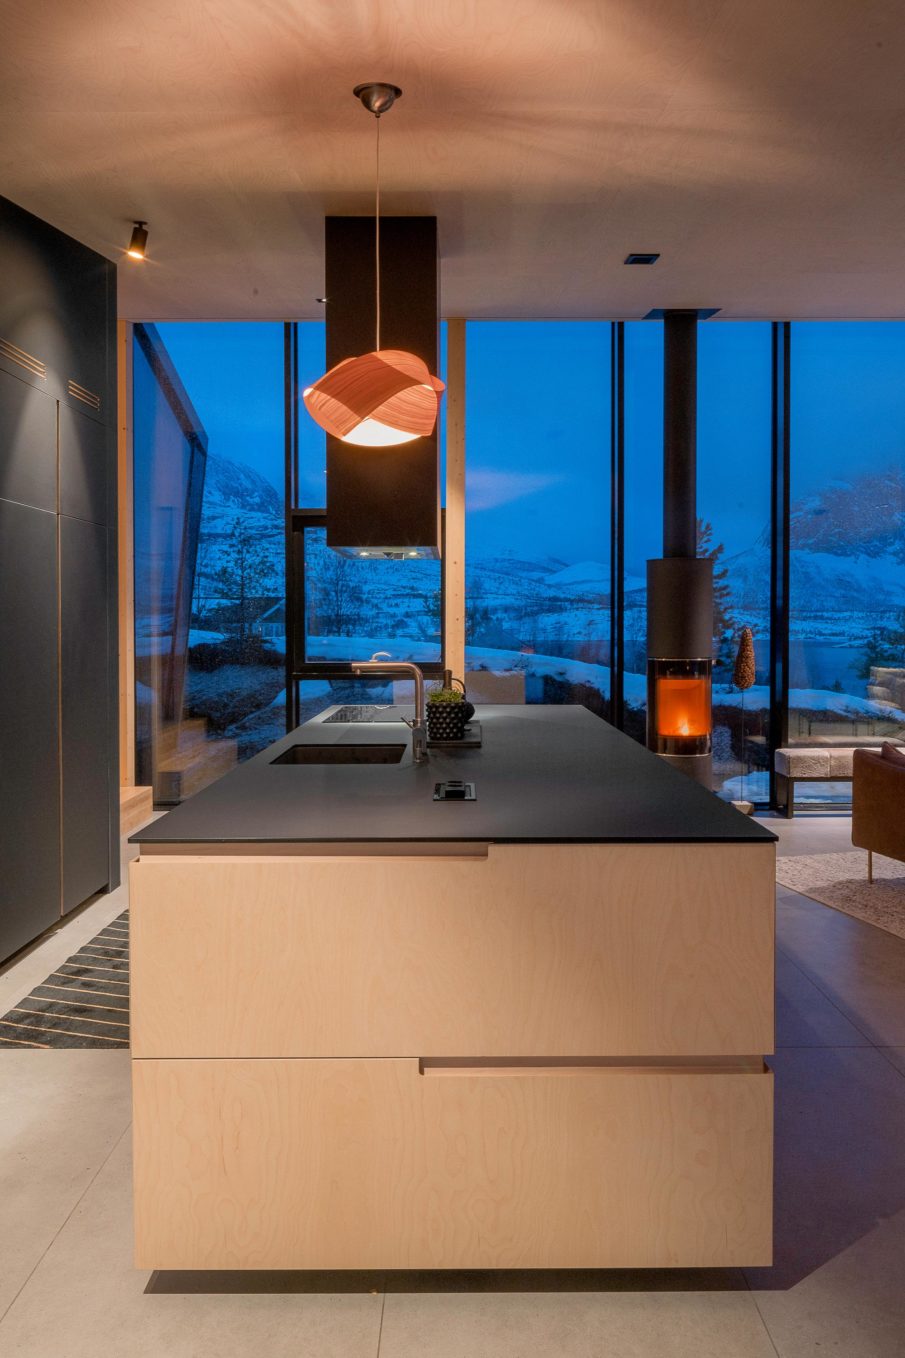 Kitchen island with a fireplace in the background, dusk outside behind the large windows.